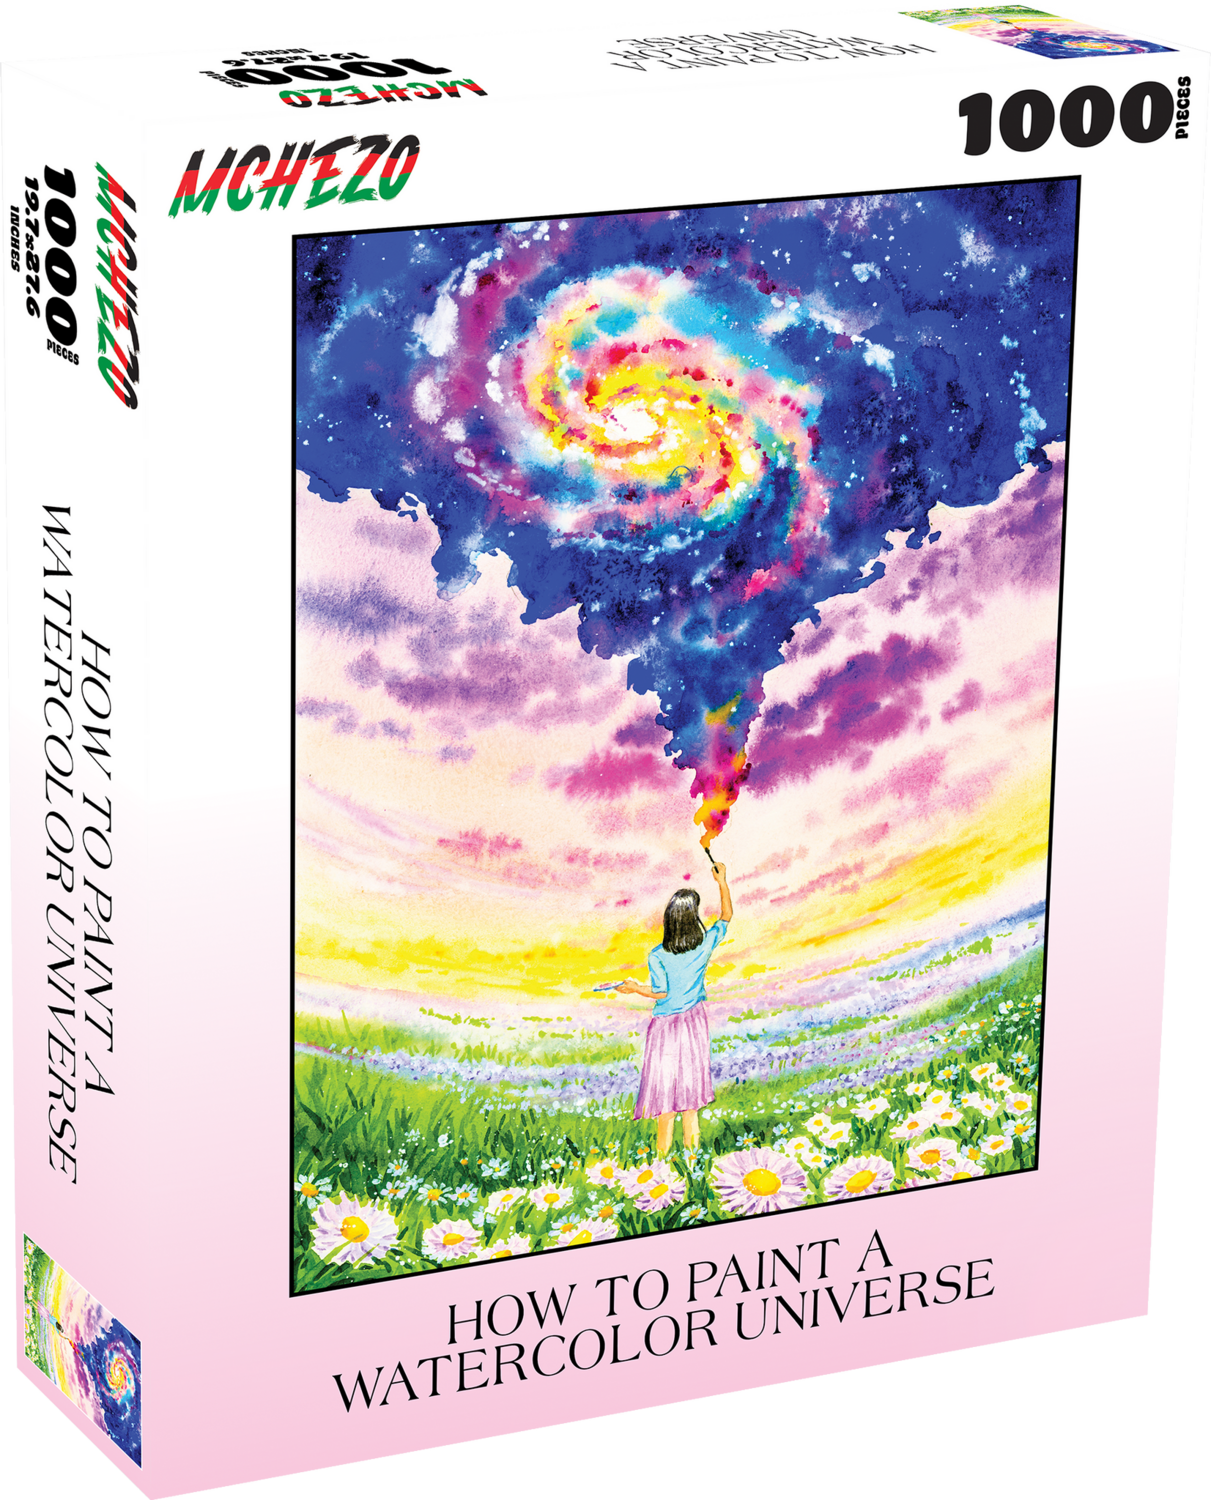 How to Paint a Watercolor Universe 1000 Piece Jigsaw Puzzle